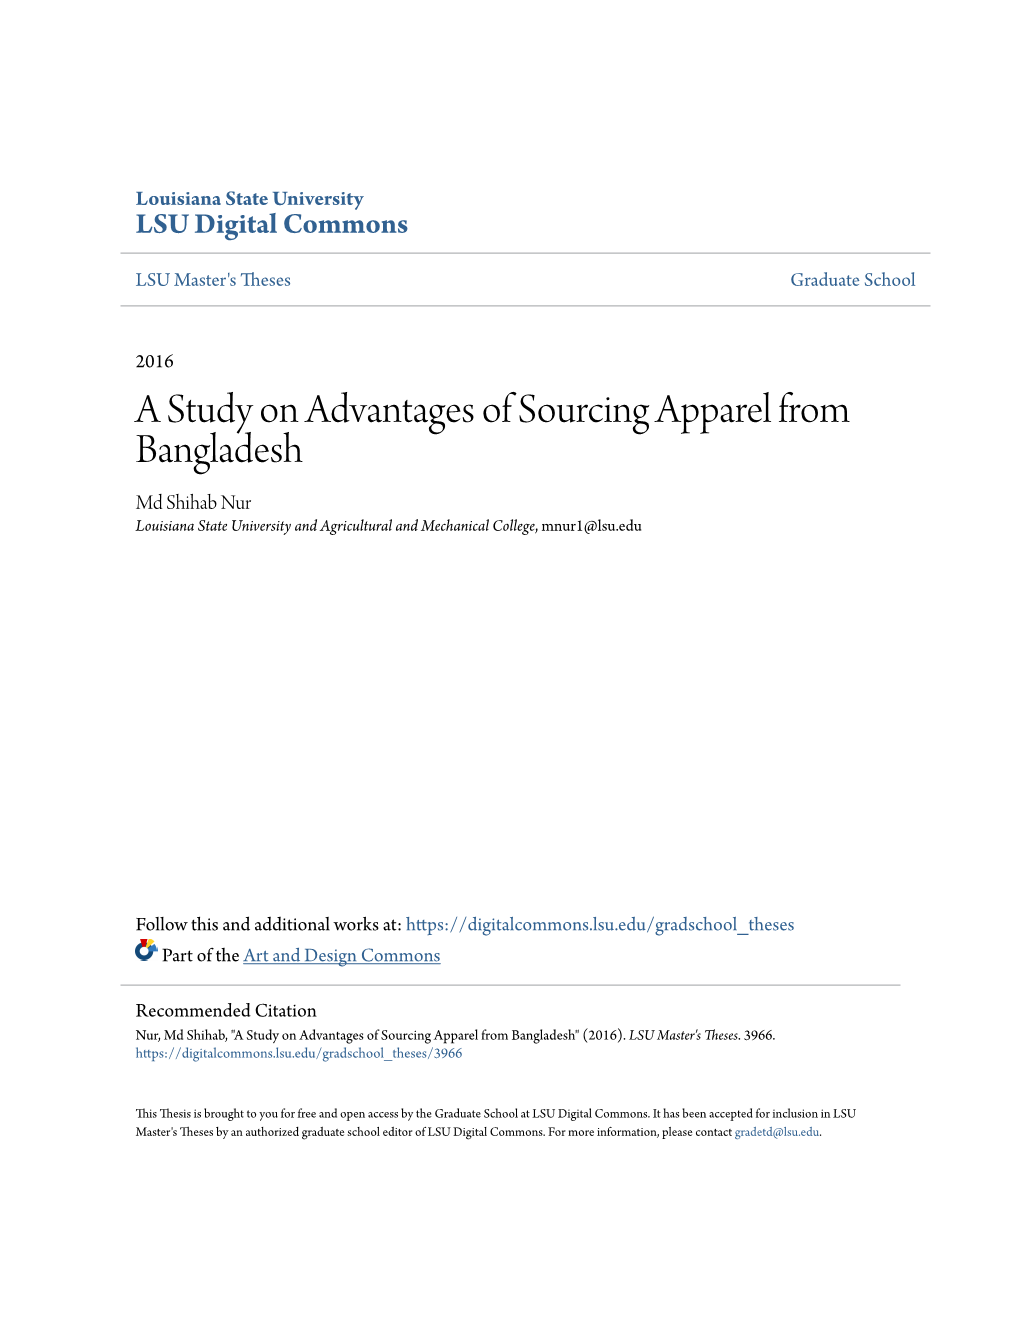 A Study on Advantages of Sourcing Apparel from Bangladesh Md Shihab Nur Louisiana State University and Agricultural and Mechanical College, Mnur1@Lsu.Edu